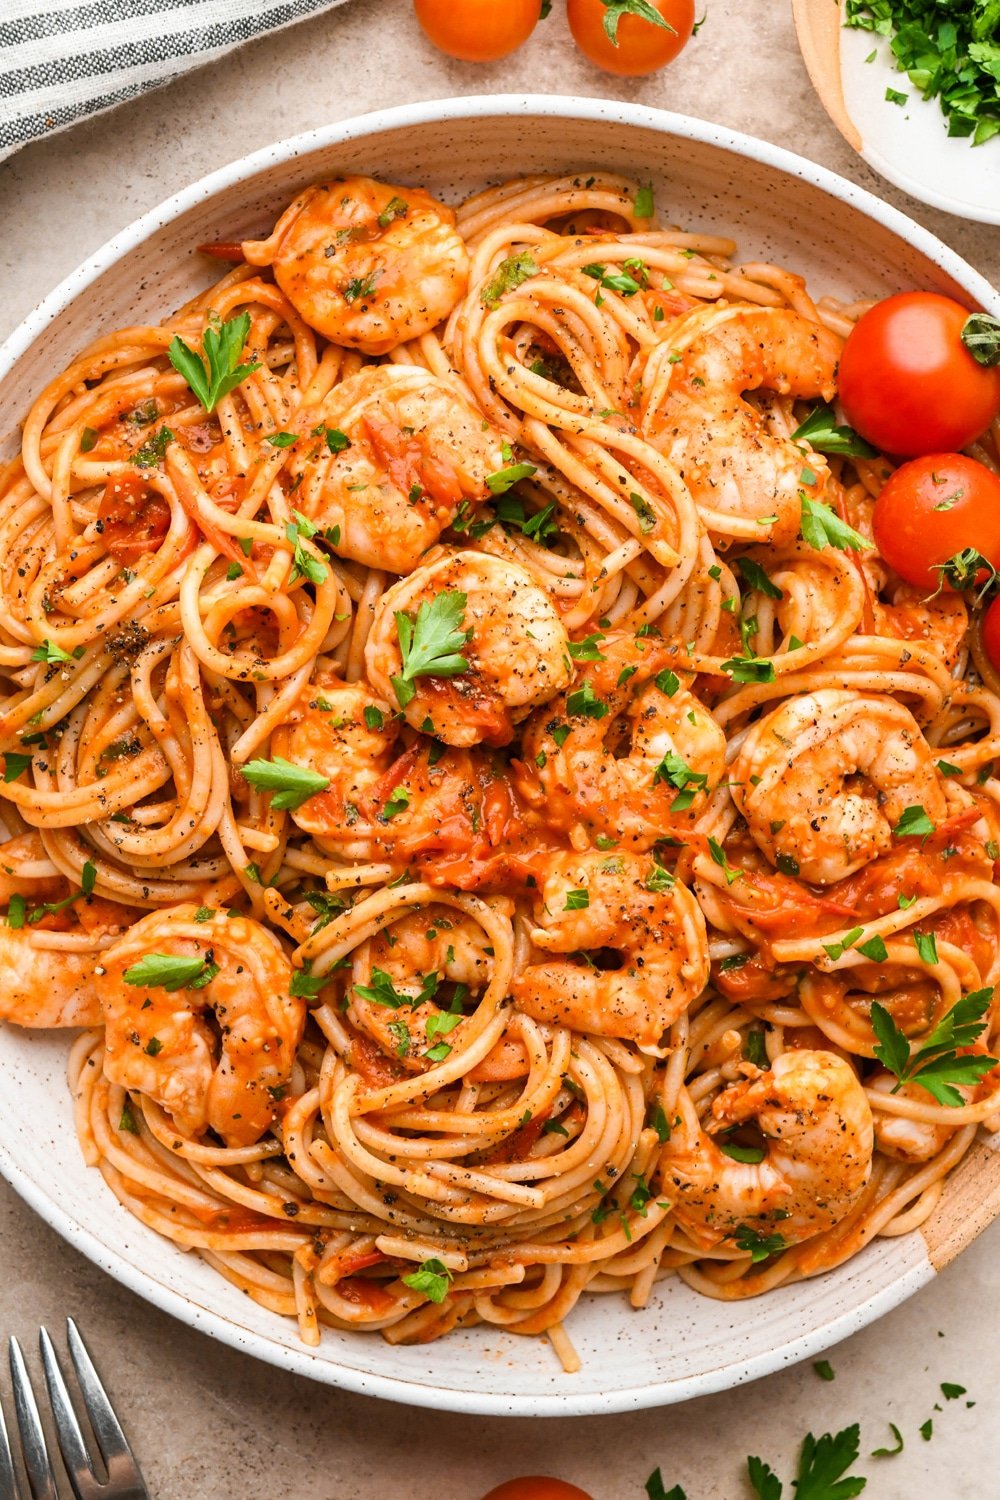 A large shallow ceramic bowl with a generous portion of burst cherry tomato and shrimp pasta. It is garnished with fresh parsley and there are several cherry tomatoes on the vine surrounding the bowl.